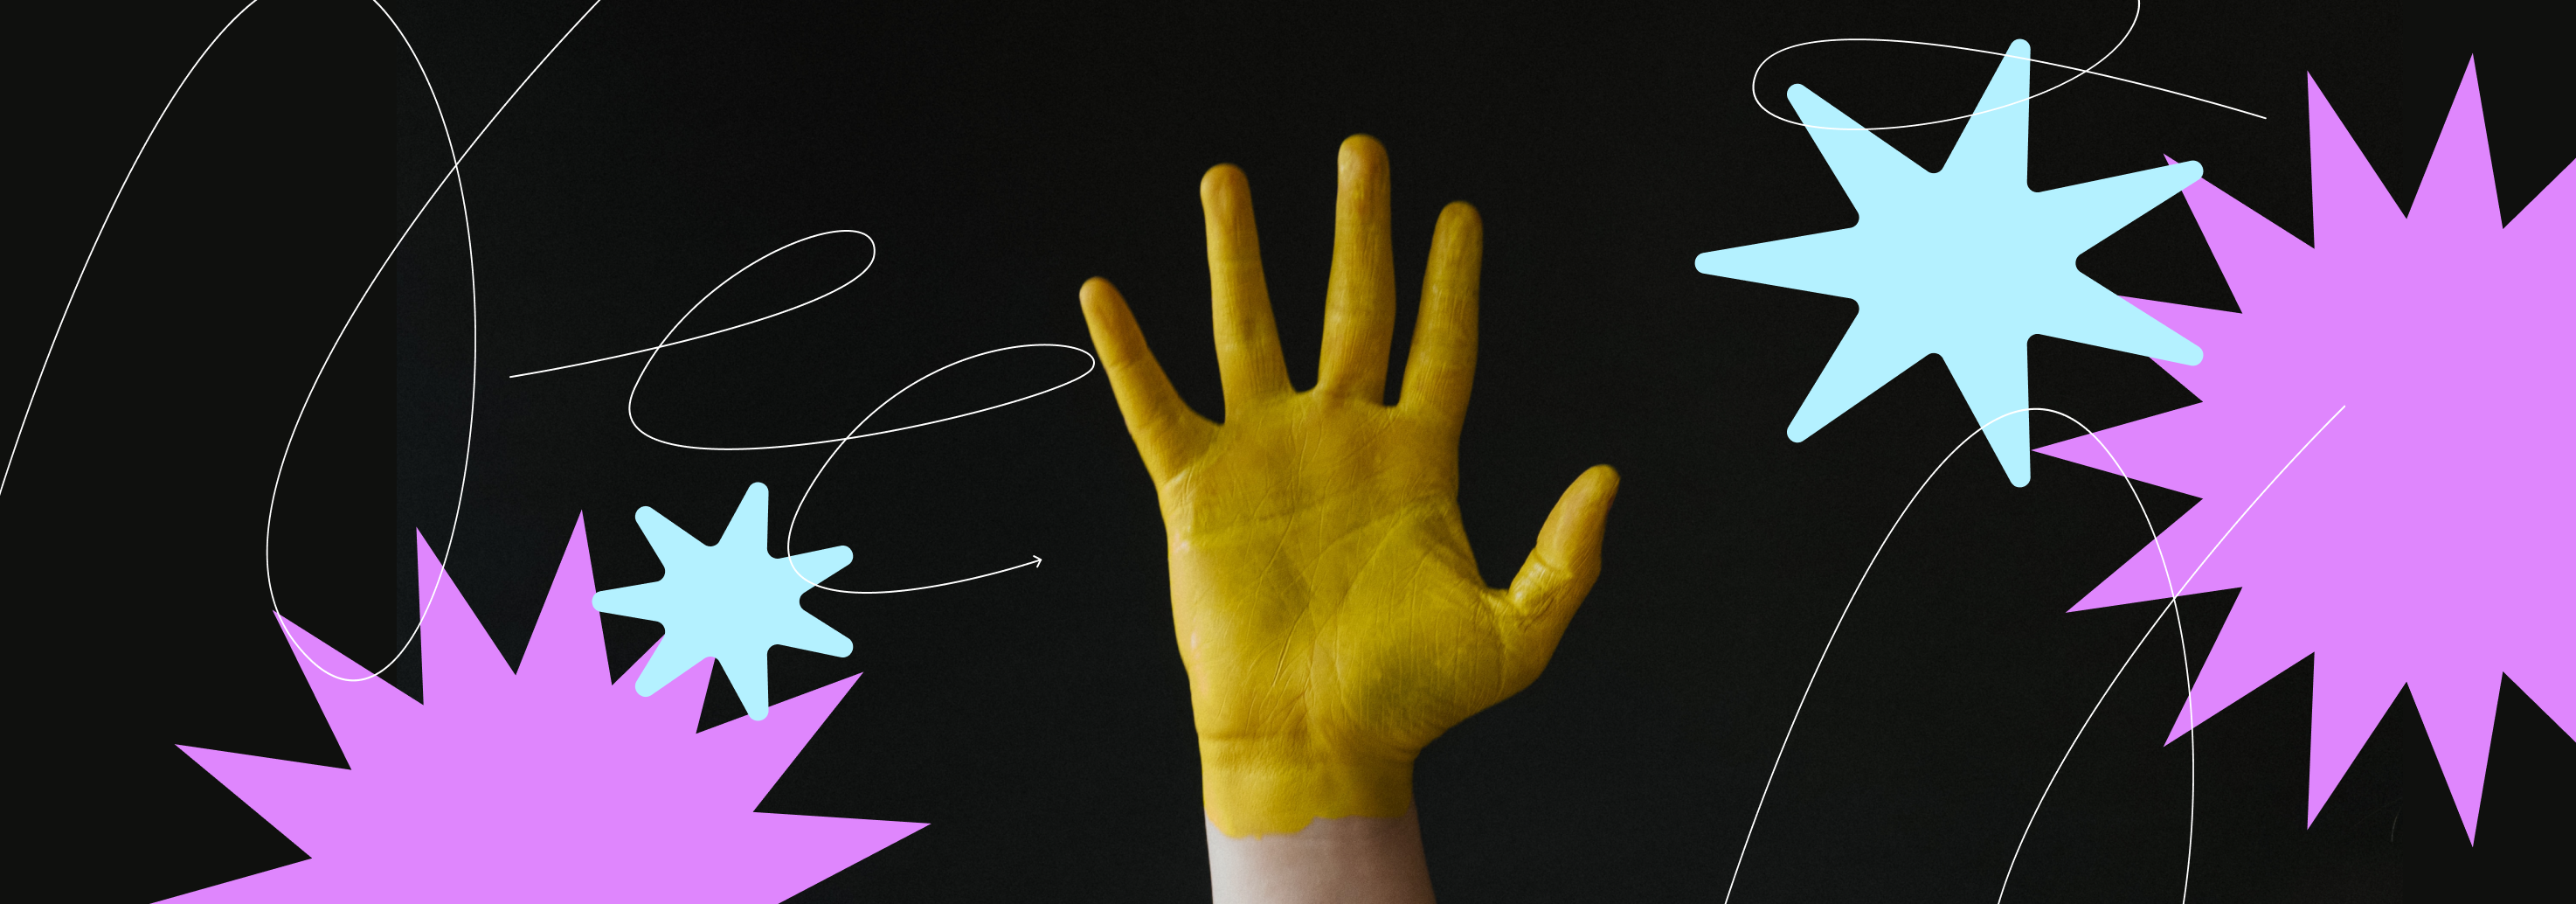 Image of a yellow hand with starburst and scribble illustrations